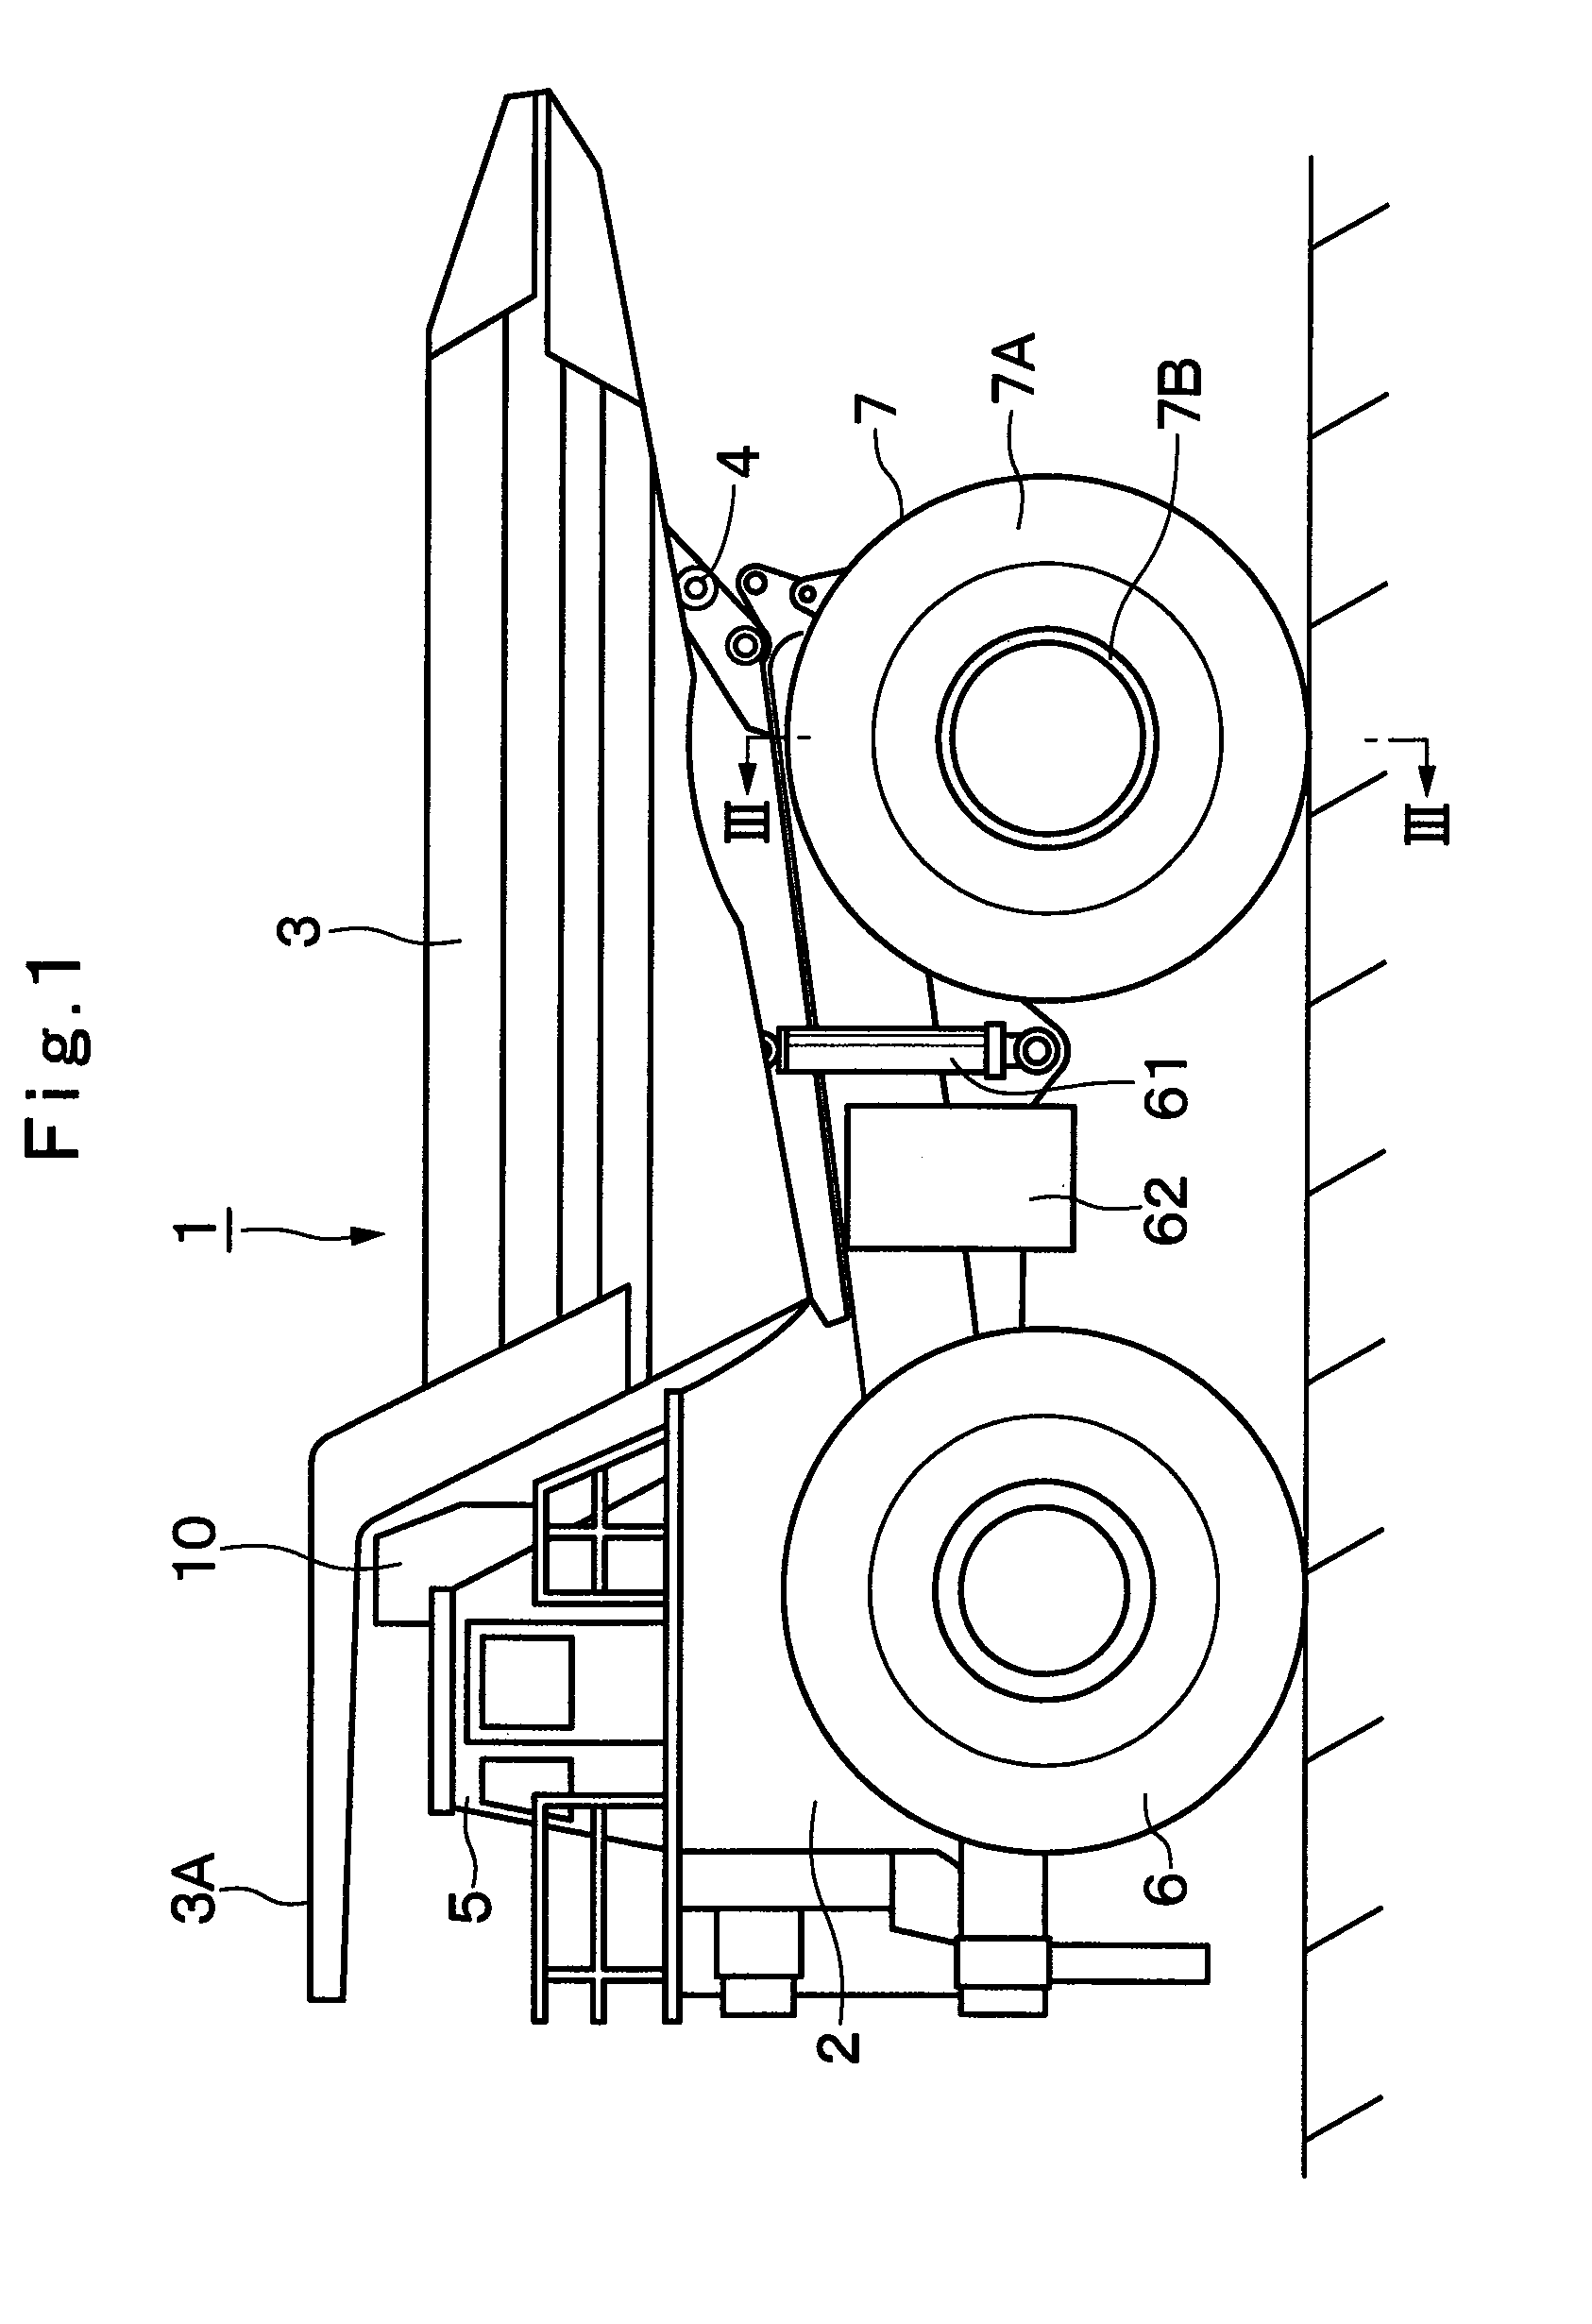 Traveling drive unit for working vehicle